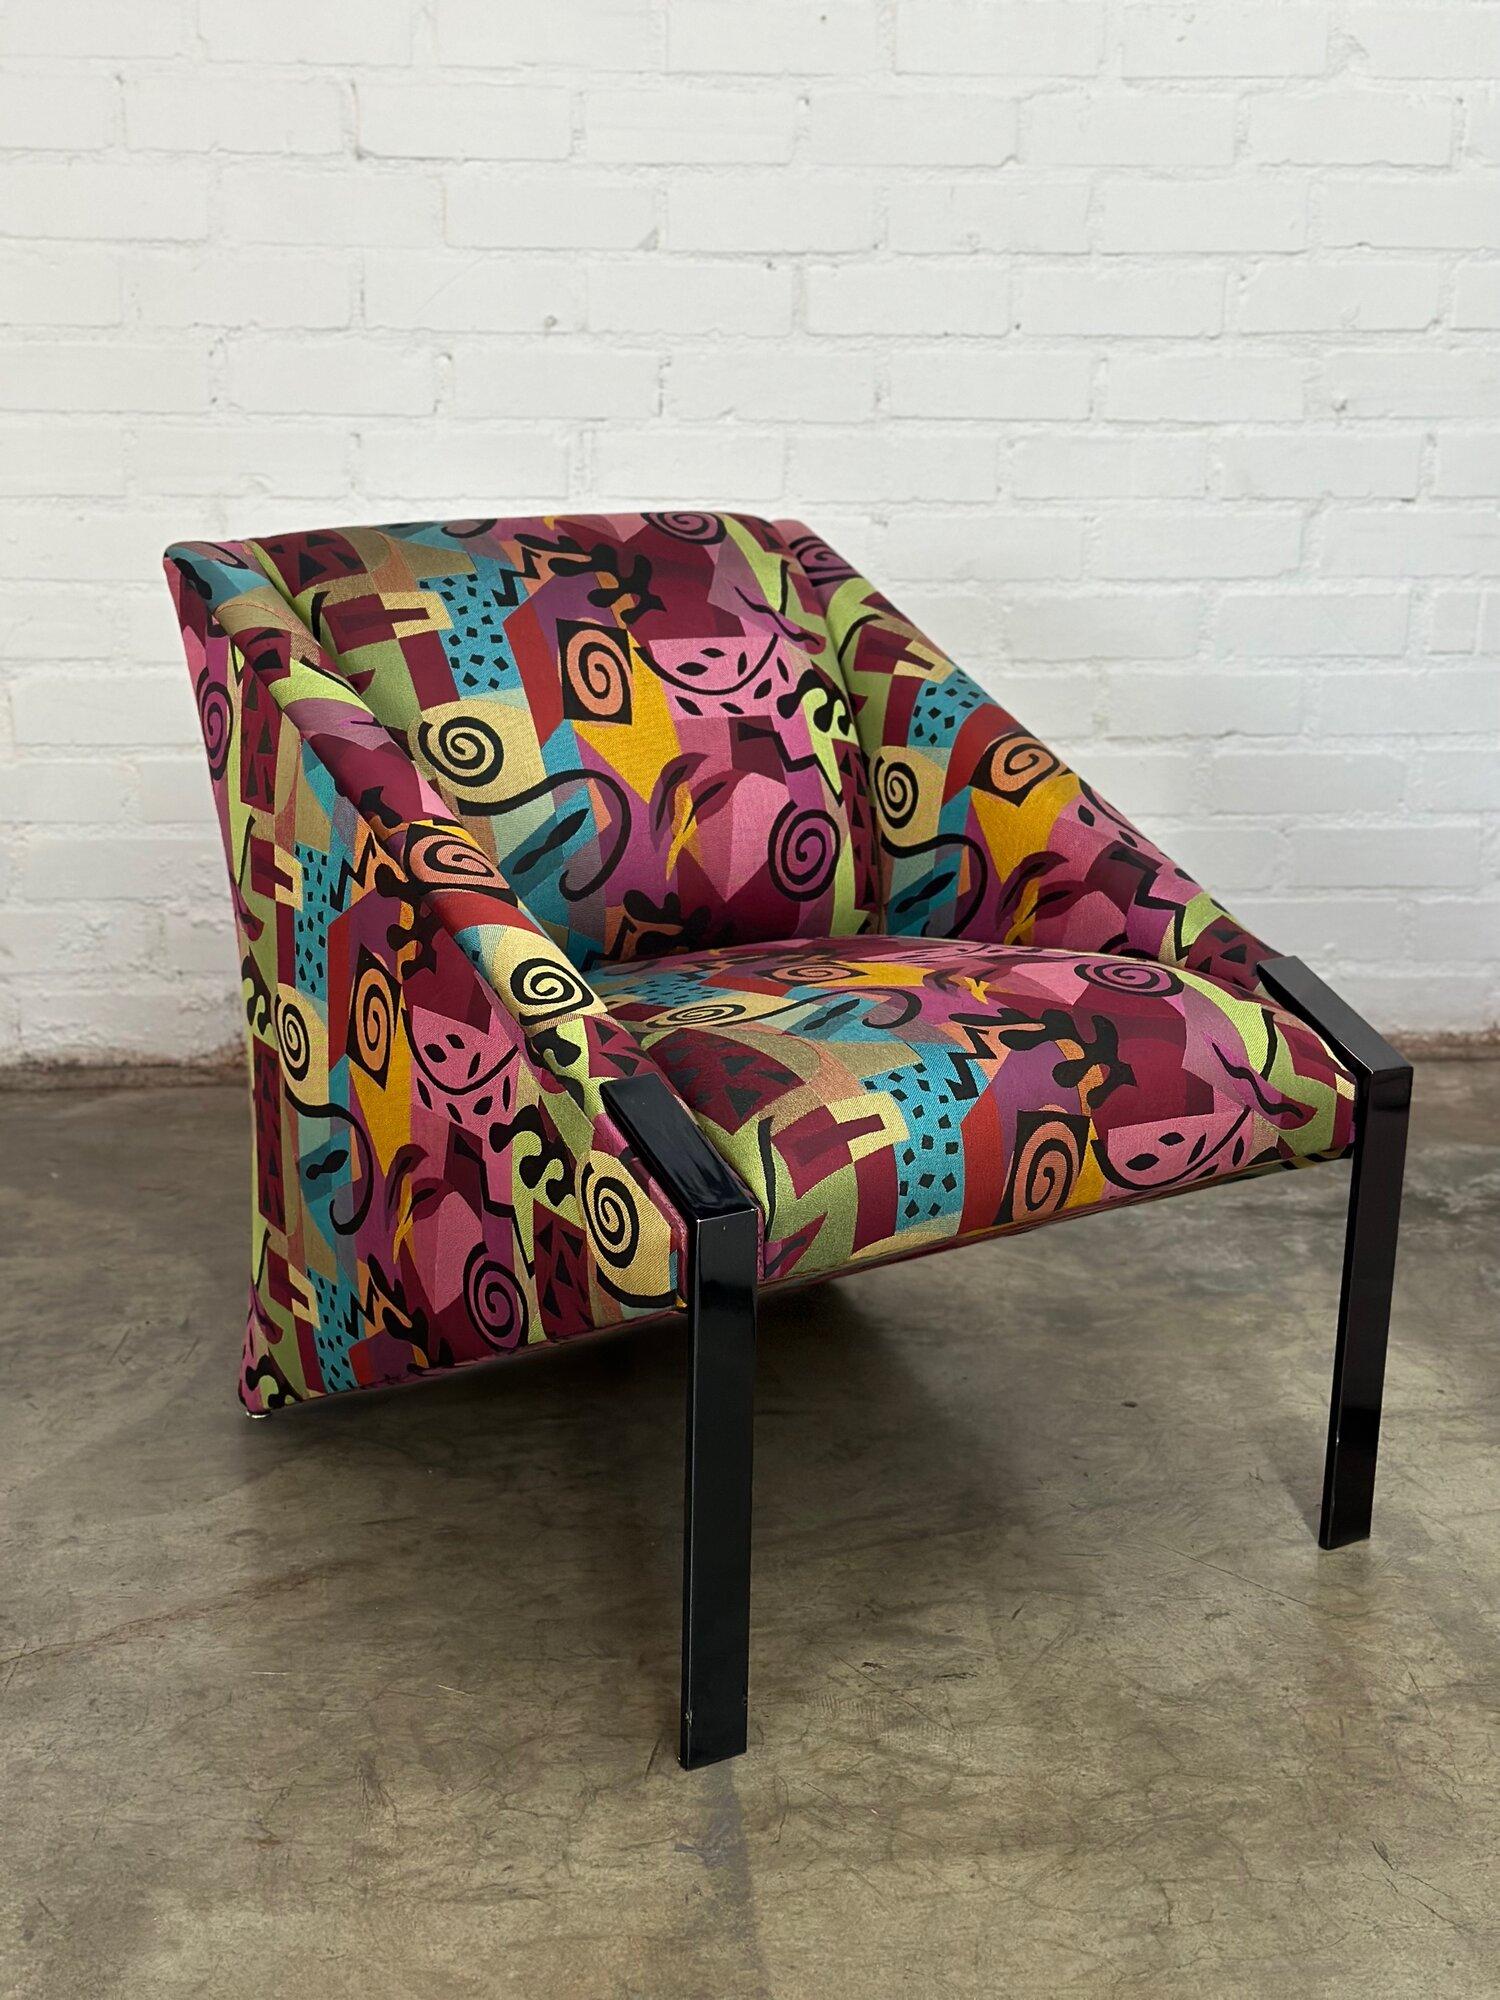 27.5 D30 H31 SW23 SD21 SH18 AH20

Angular post modern lounge chair in colorful original fabric. Lounge chairs feature a great body shape with two built in angled legs with a thick original coating over the black surface. Chairs are both structurally